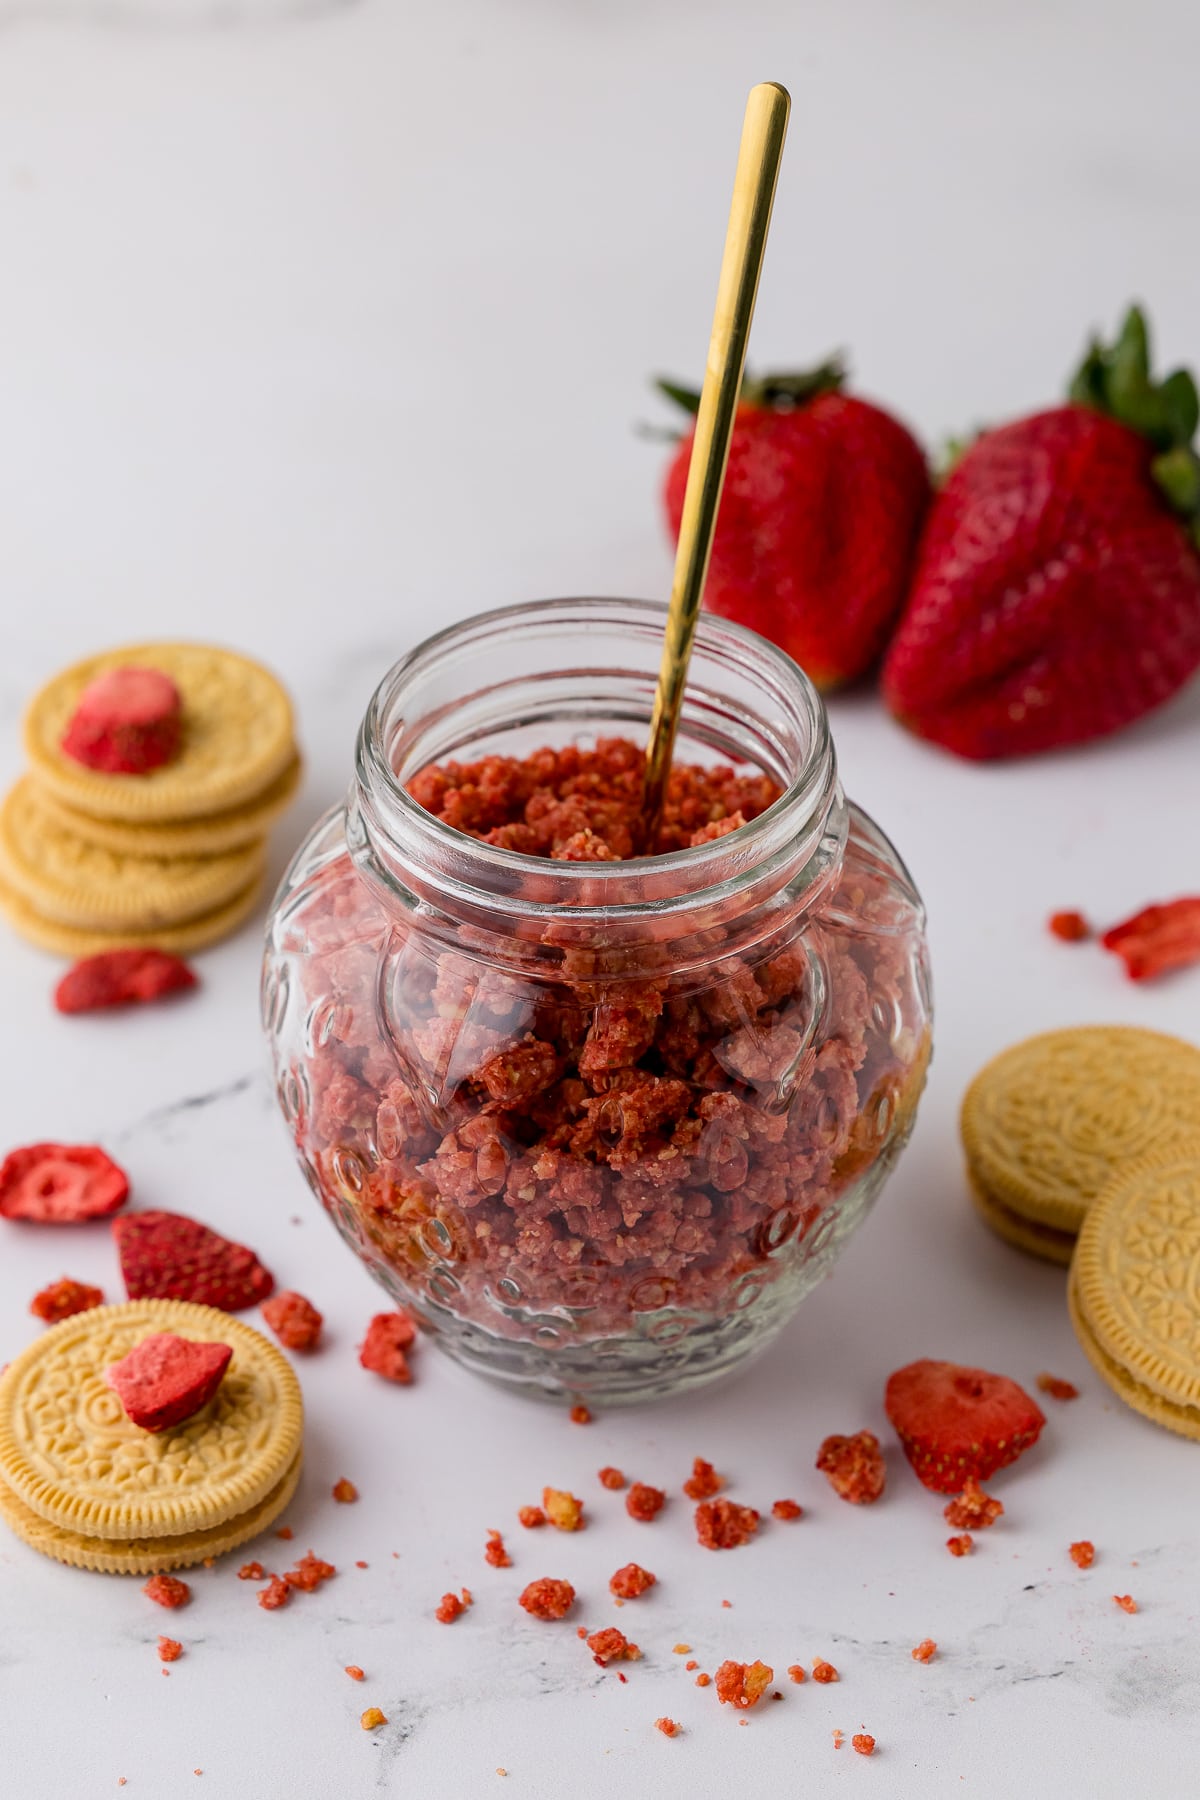 strawberry crunch in a glass strawberry shaped jar with a golden spoon inside and golden oreos, fresh strawberries, and freeze dried strawberries on a white countertop